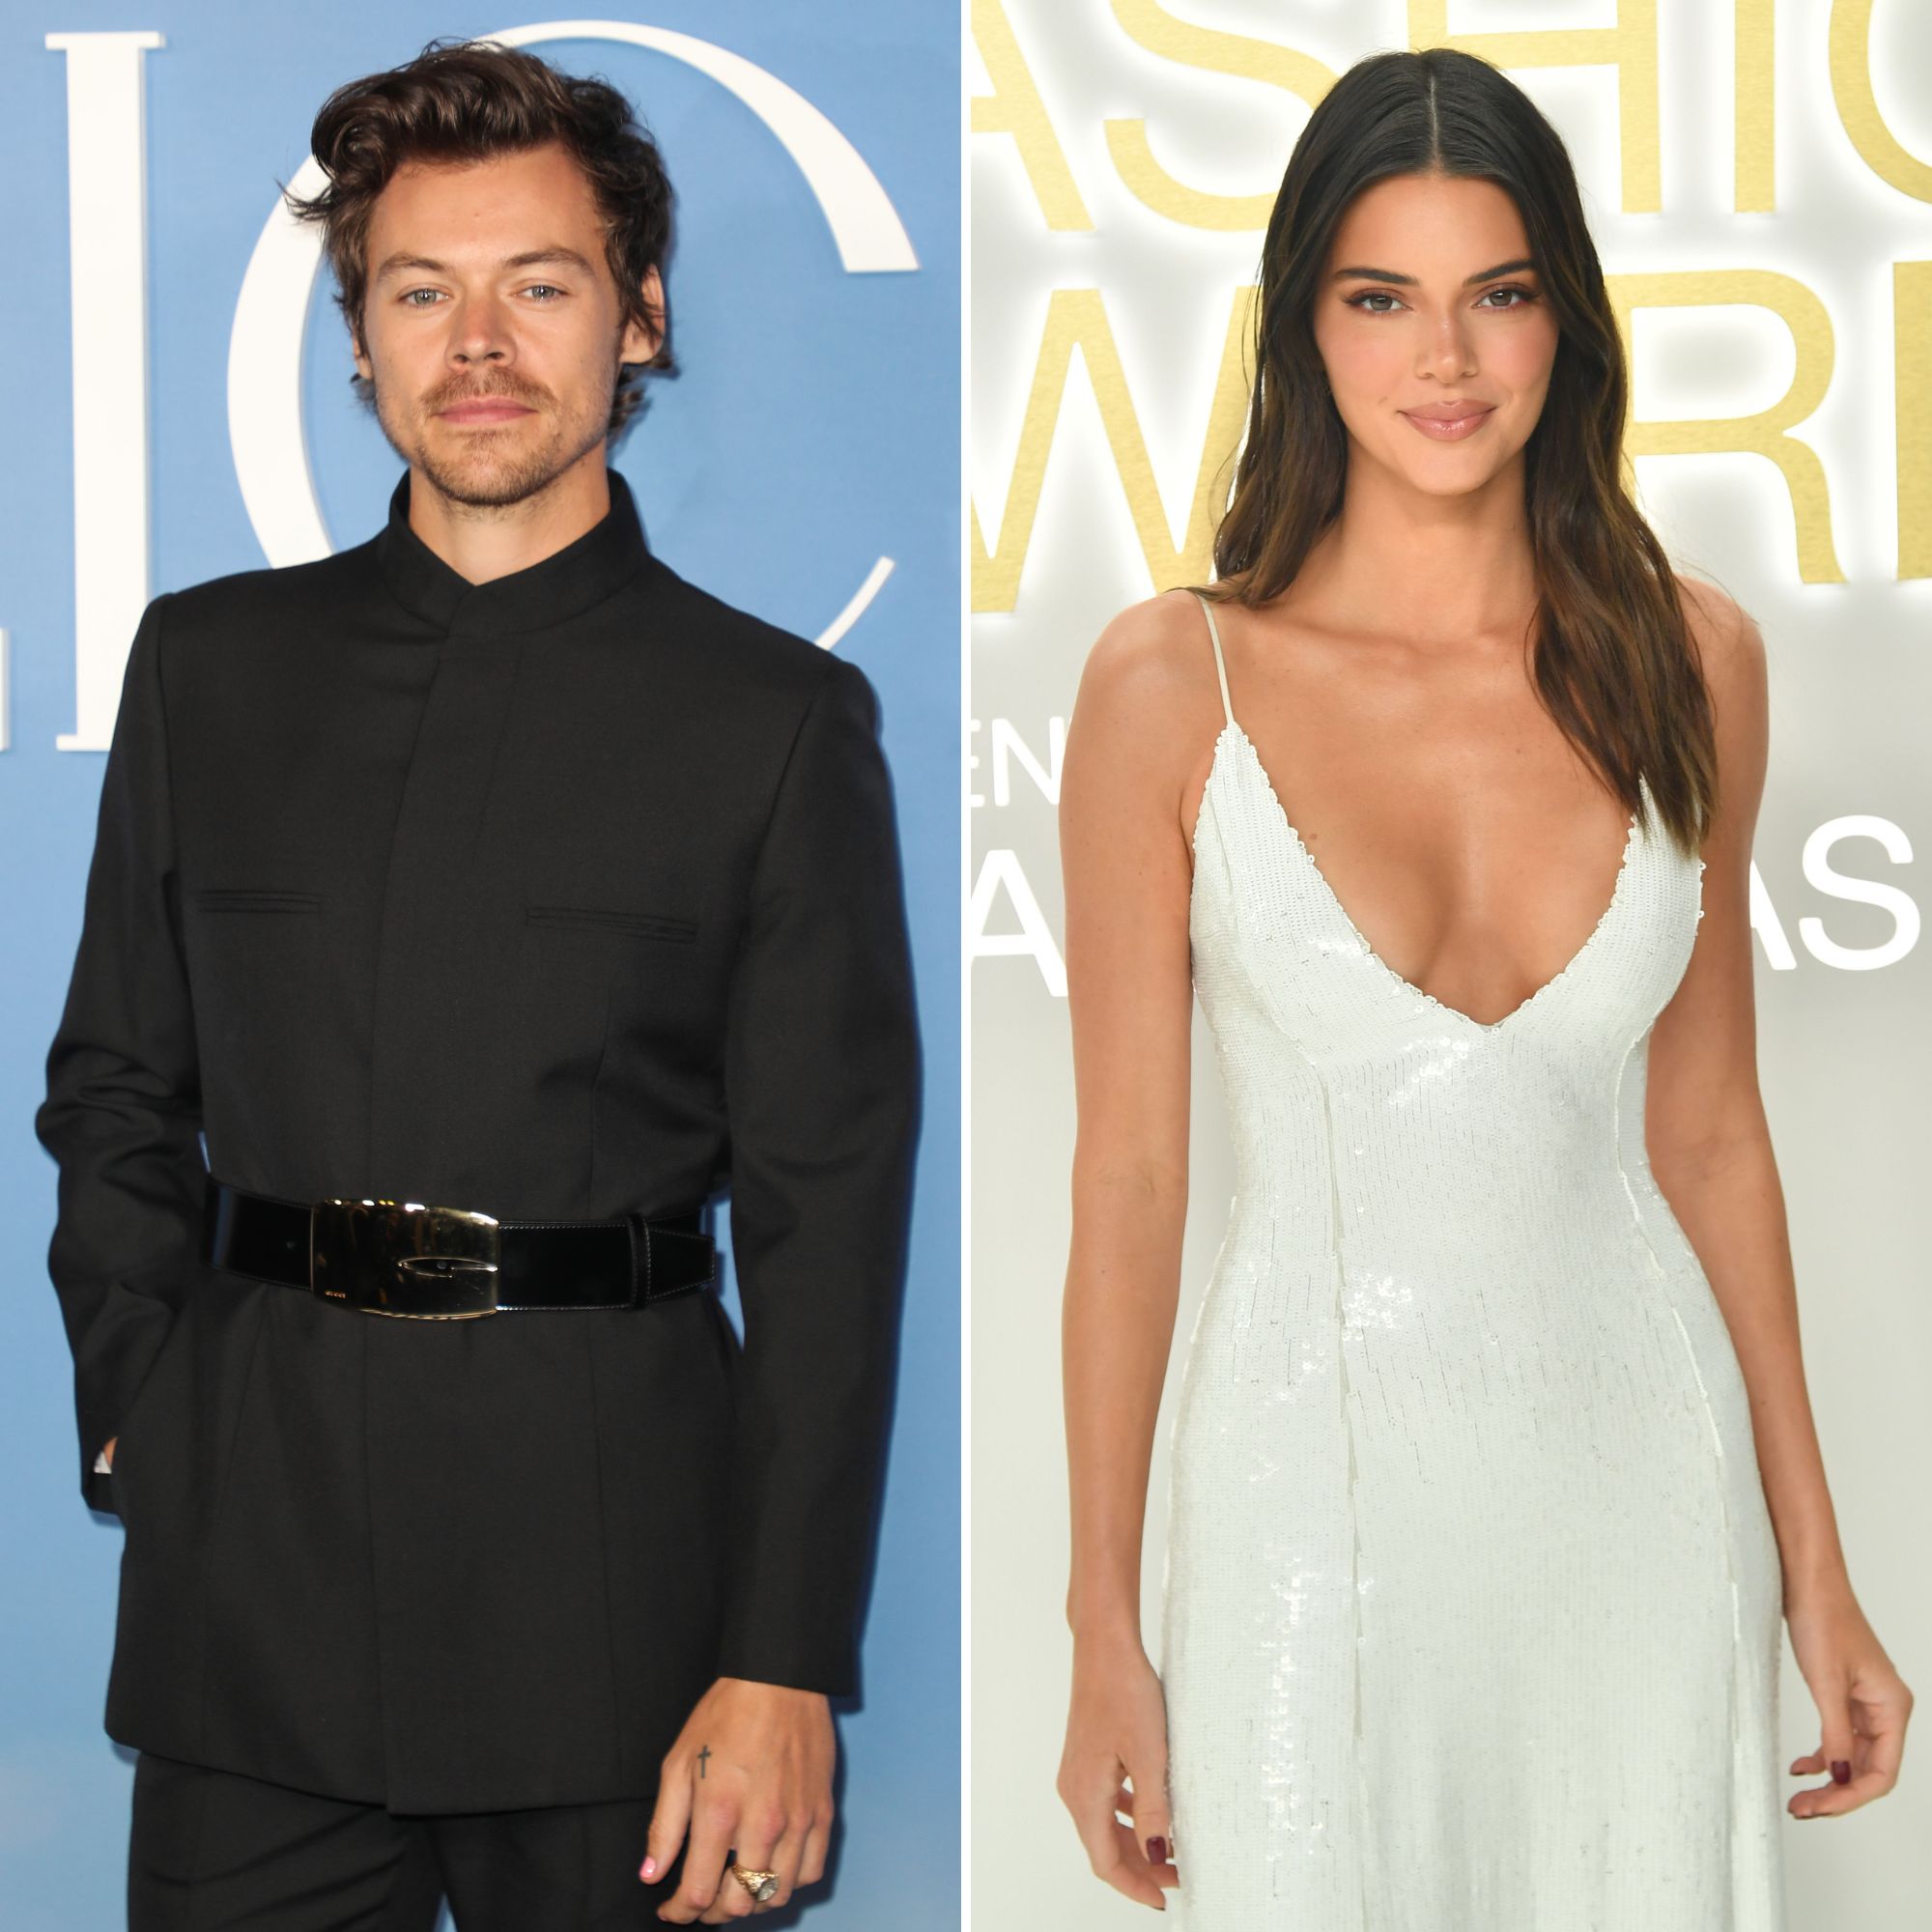 Harry Styles dating history: From Taylor Swift to Kendall Jenner